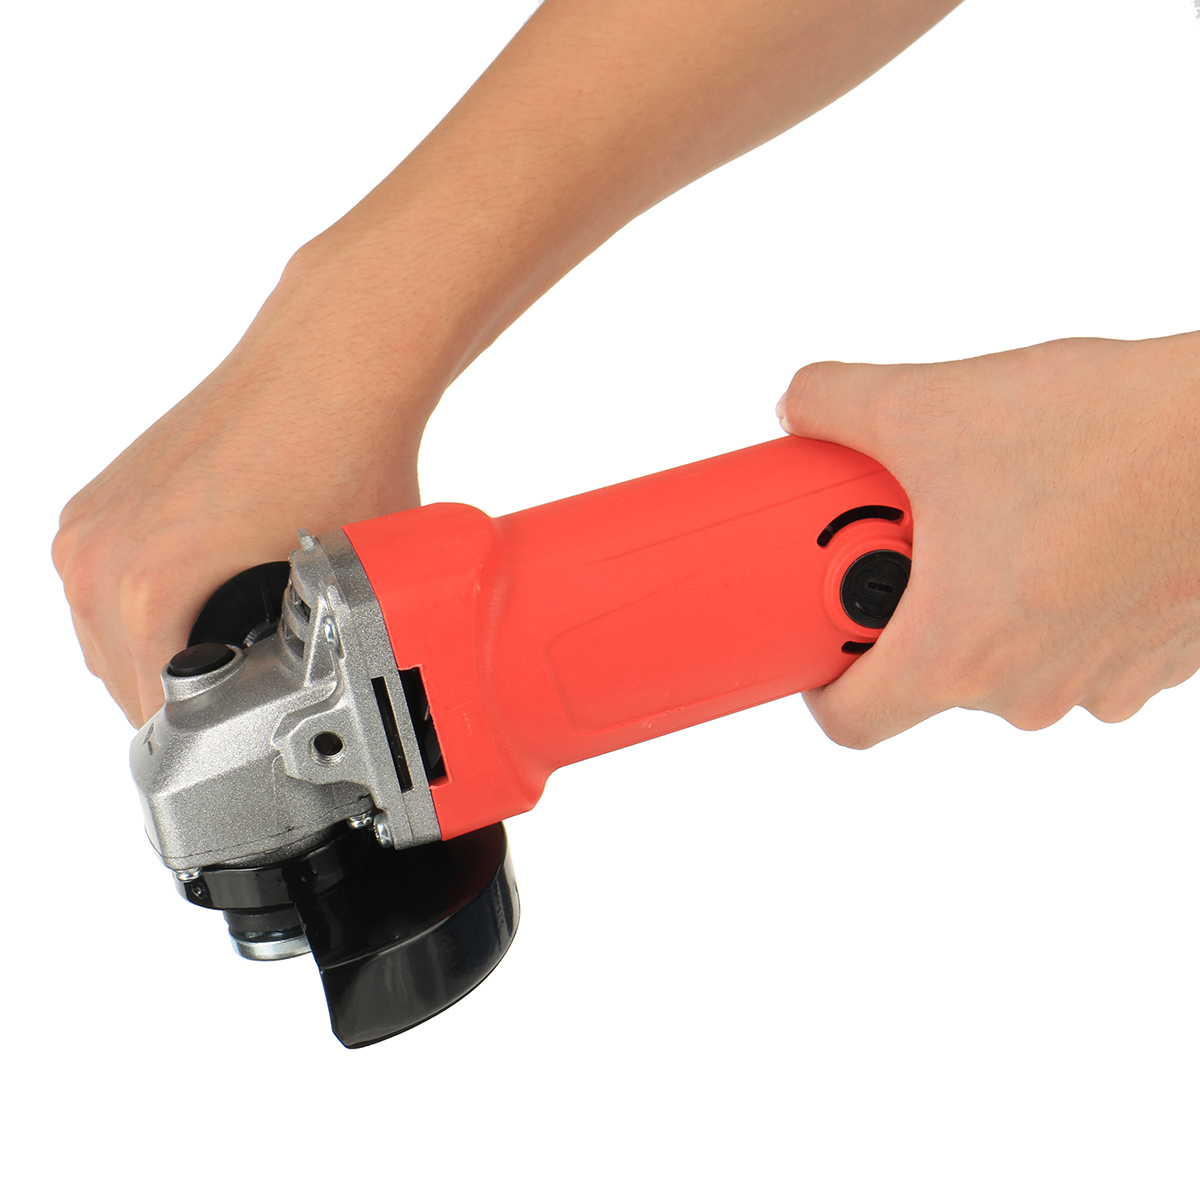 850W-100mm-11000rpm-Electric-Angle-Grinder-Cutting-Machine-Handheld-Polishing-Grinding-Carving-Tool-1736781-9